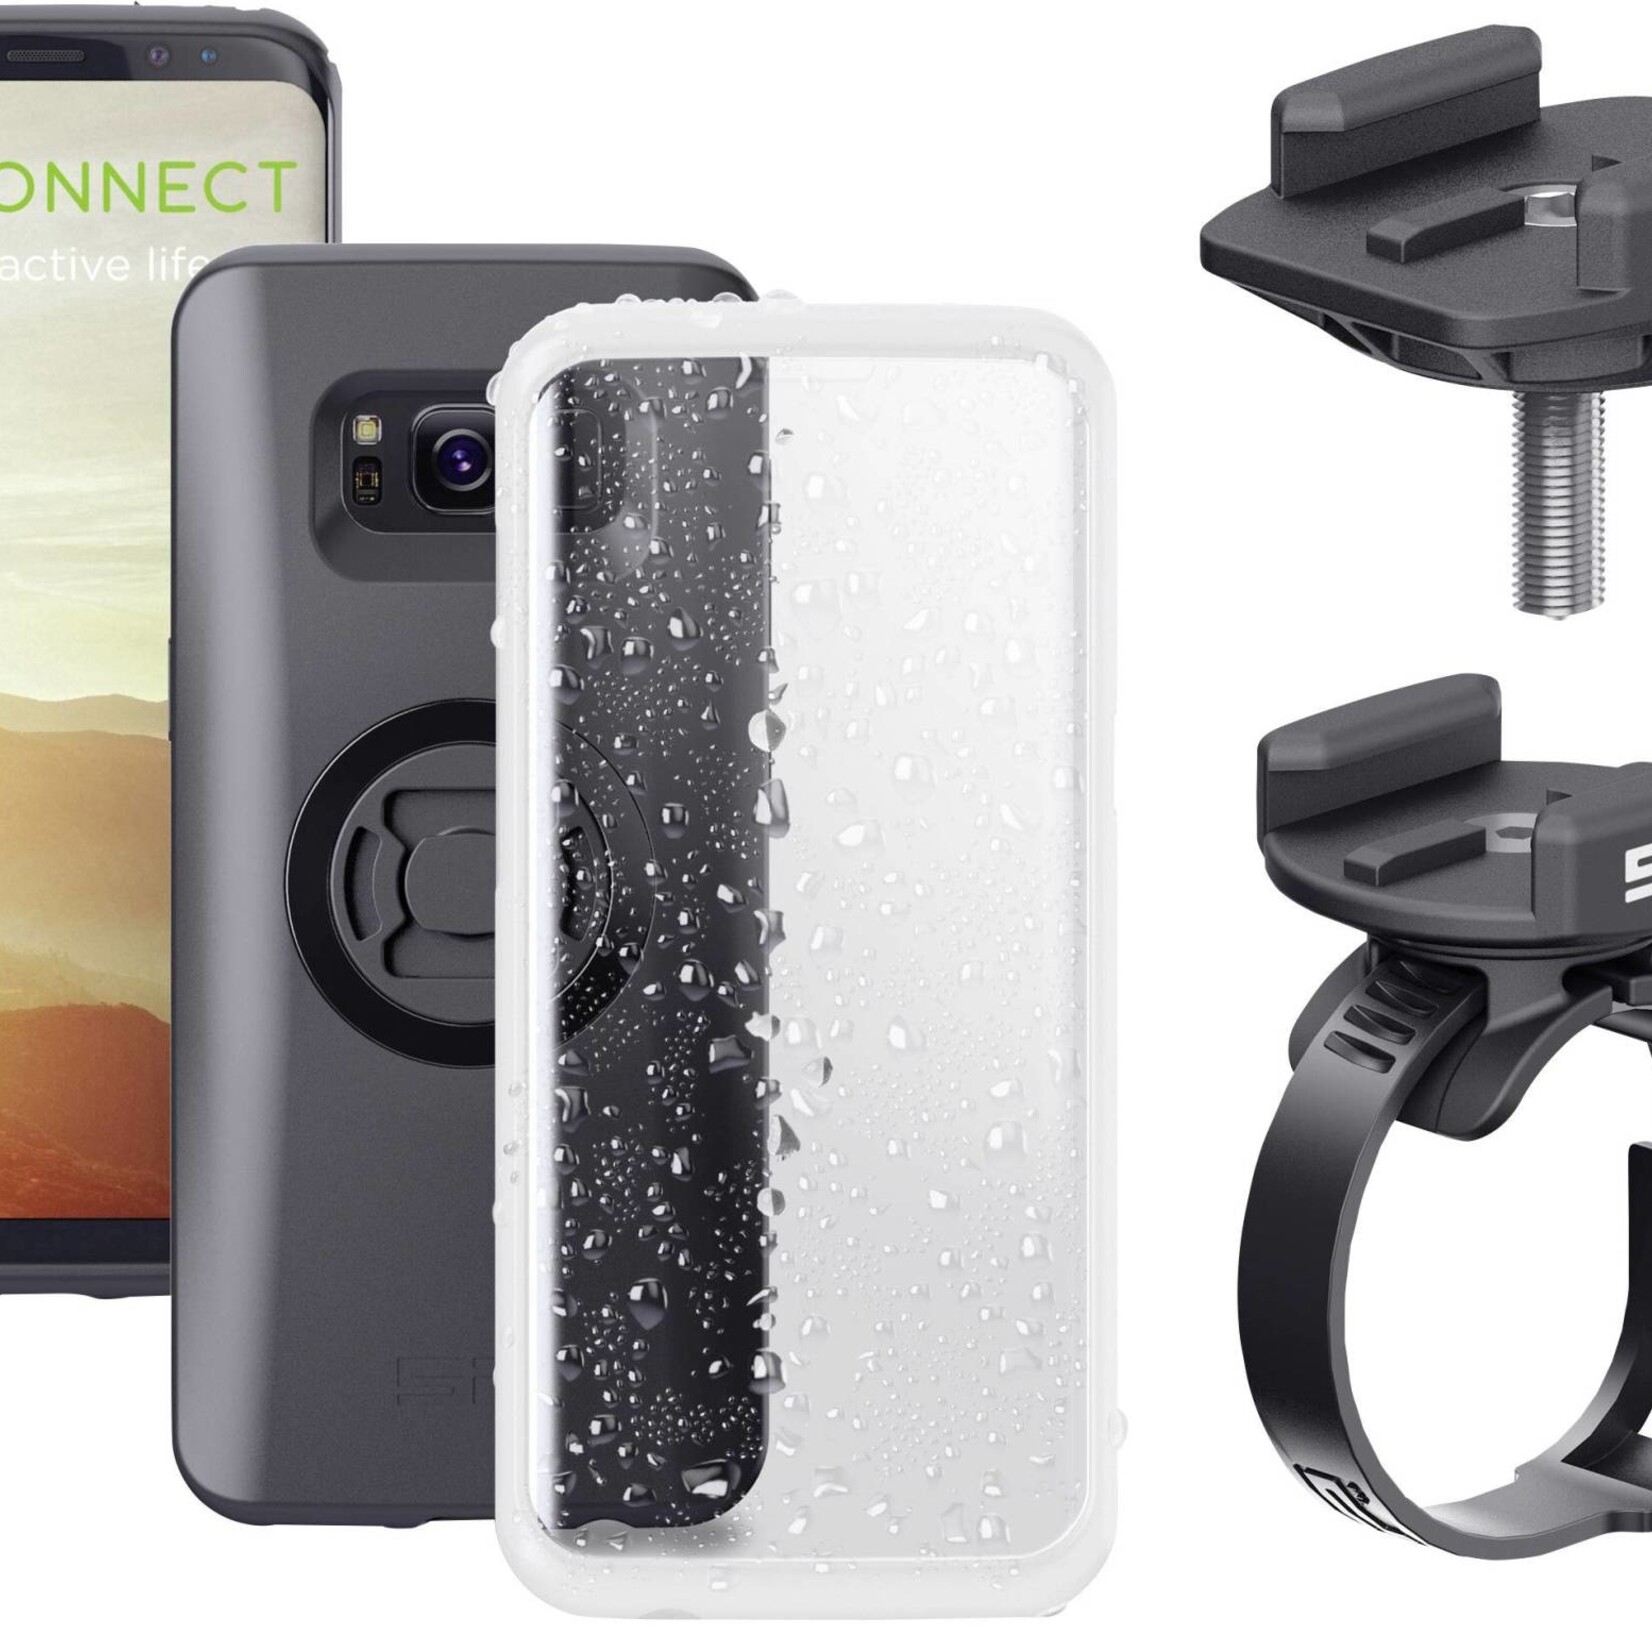 SP Connect SP Connect Galaxy S8 Bike Bundle - 4 in 1